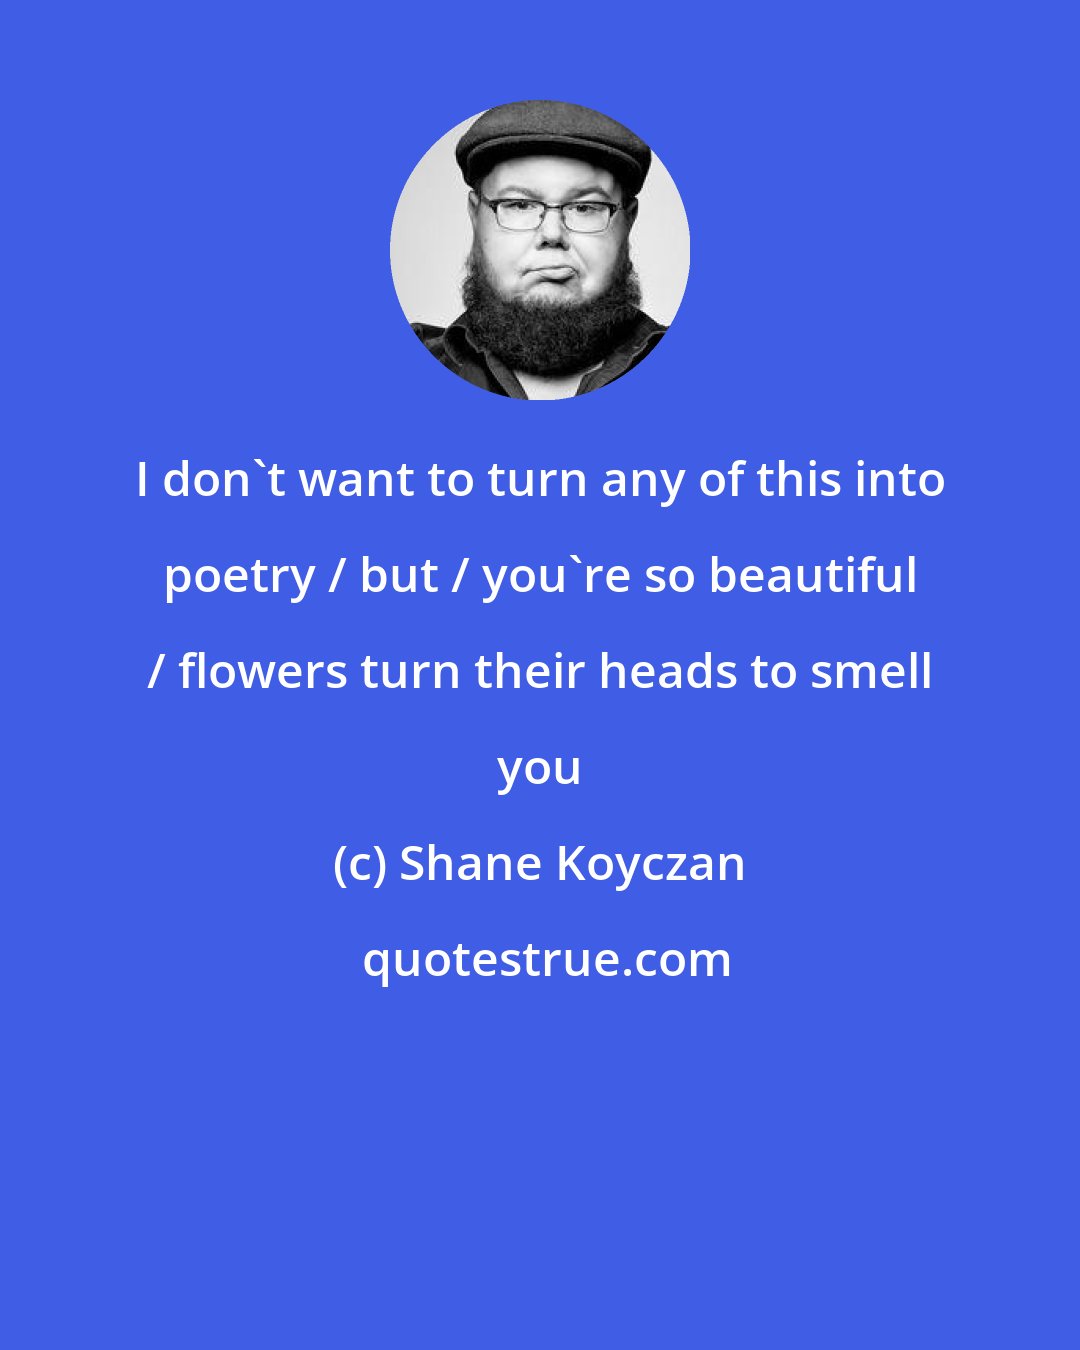 Shane Koyczan: I don't want to turn any of this into poetry / but / you're so beautiful / flowers turn their heads to smell you